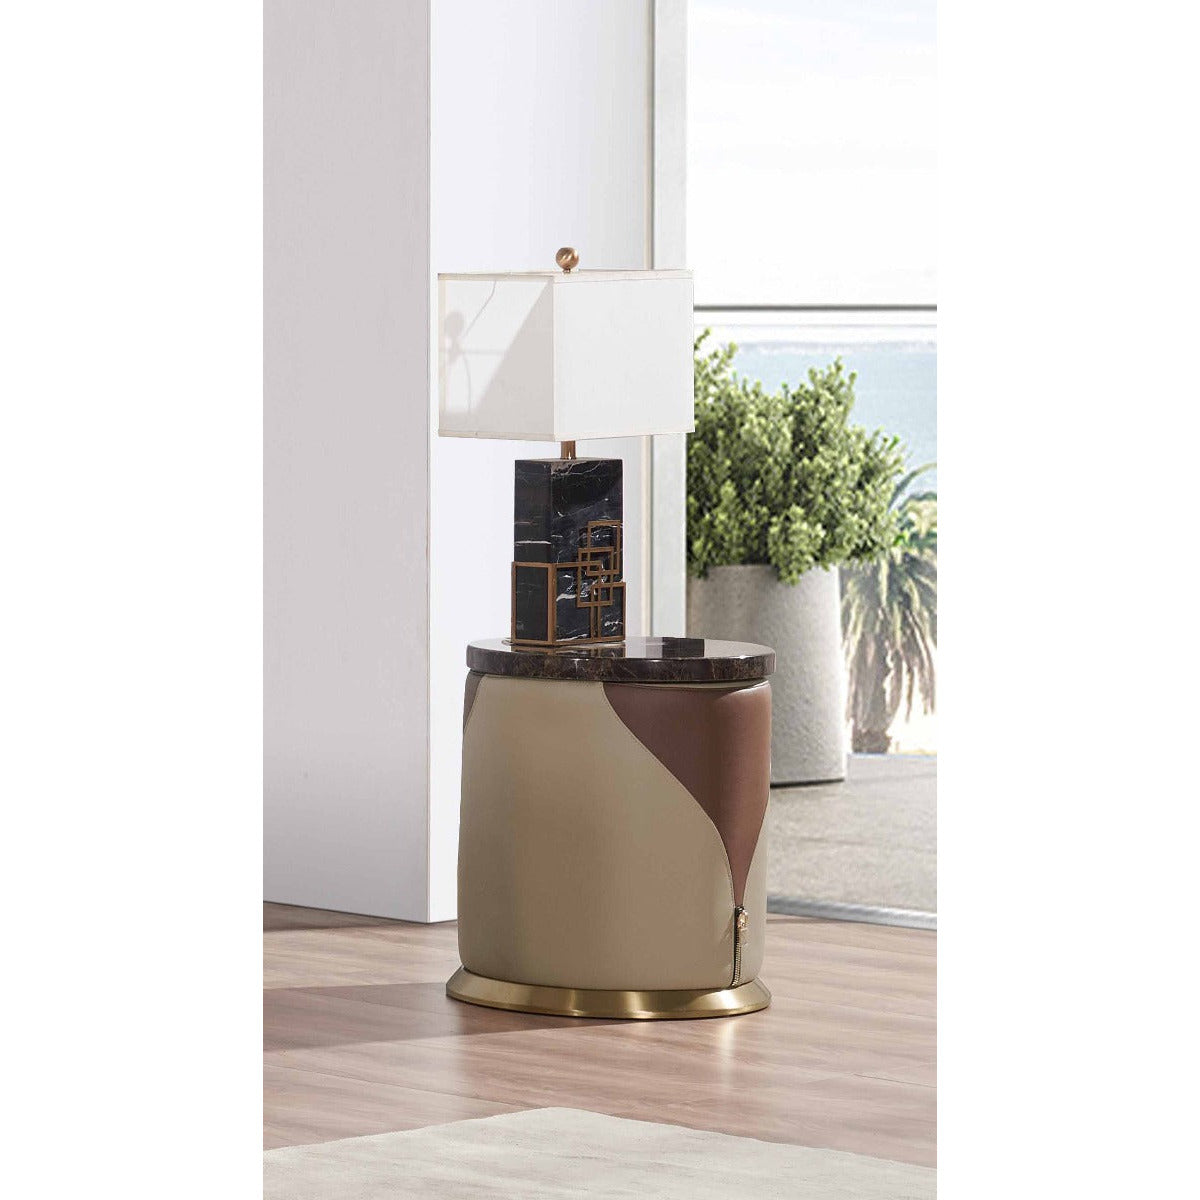 European Furniture - Glamour End Table in Tan-Brown - 51617-ET - New Star Living